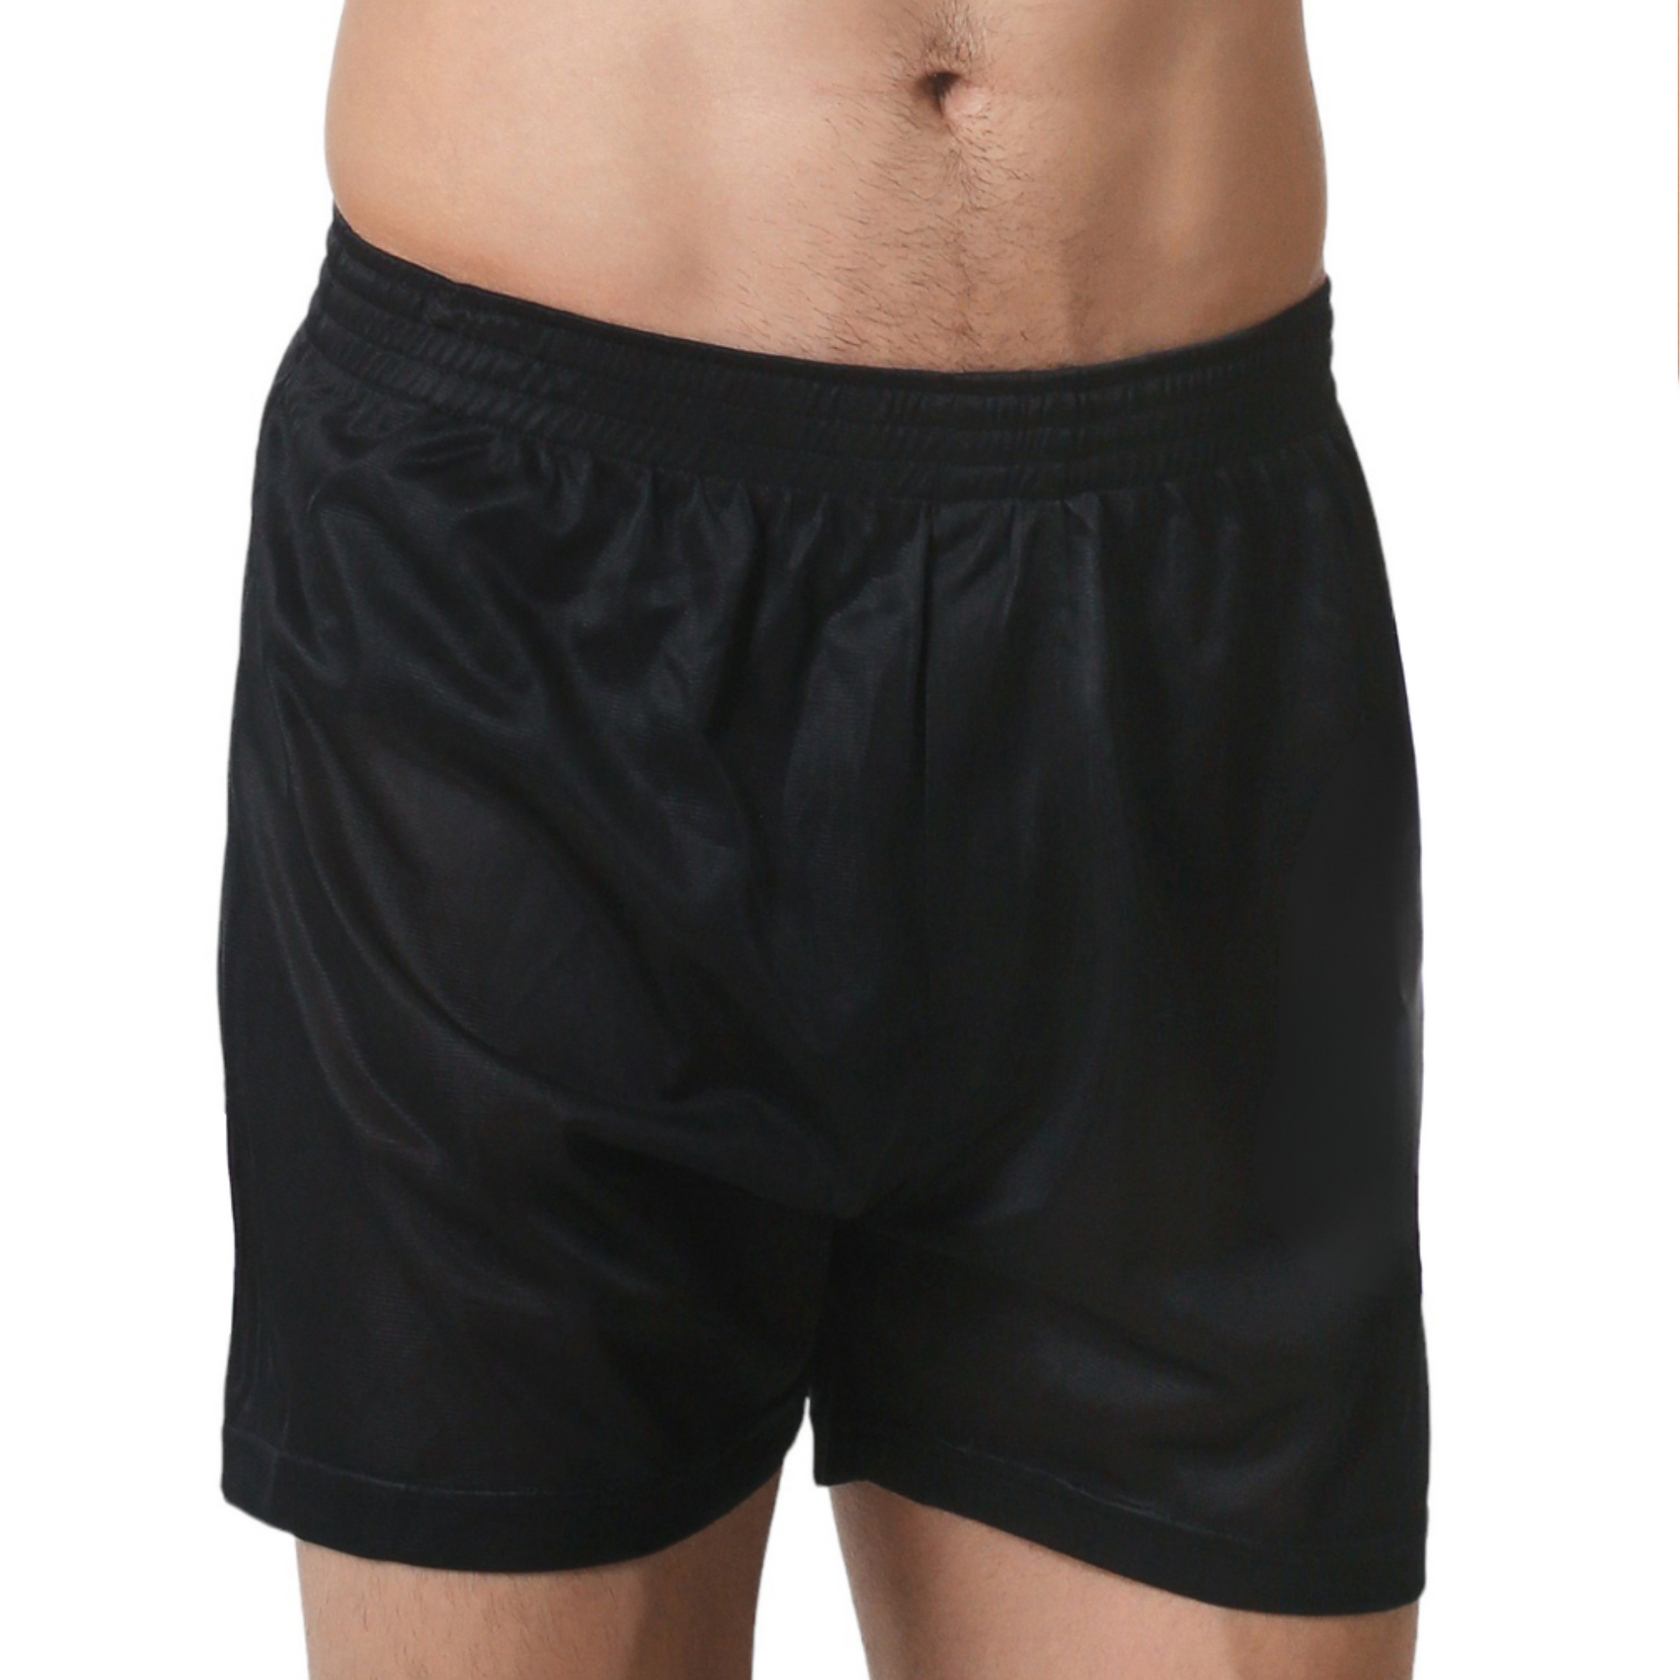 Players Nylon Tricot Boxer Players Underwear Free Shipping Over 45 0420